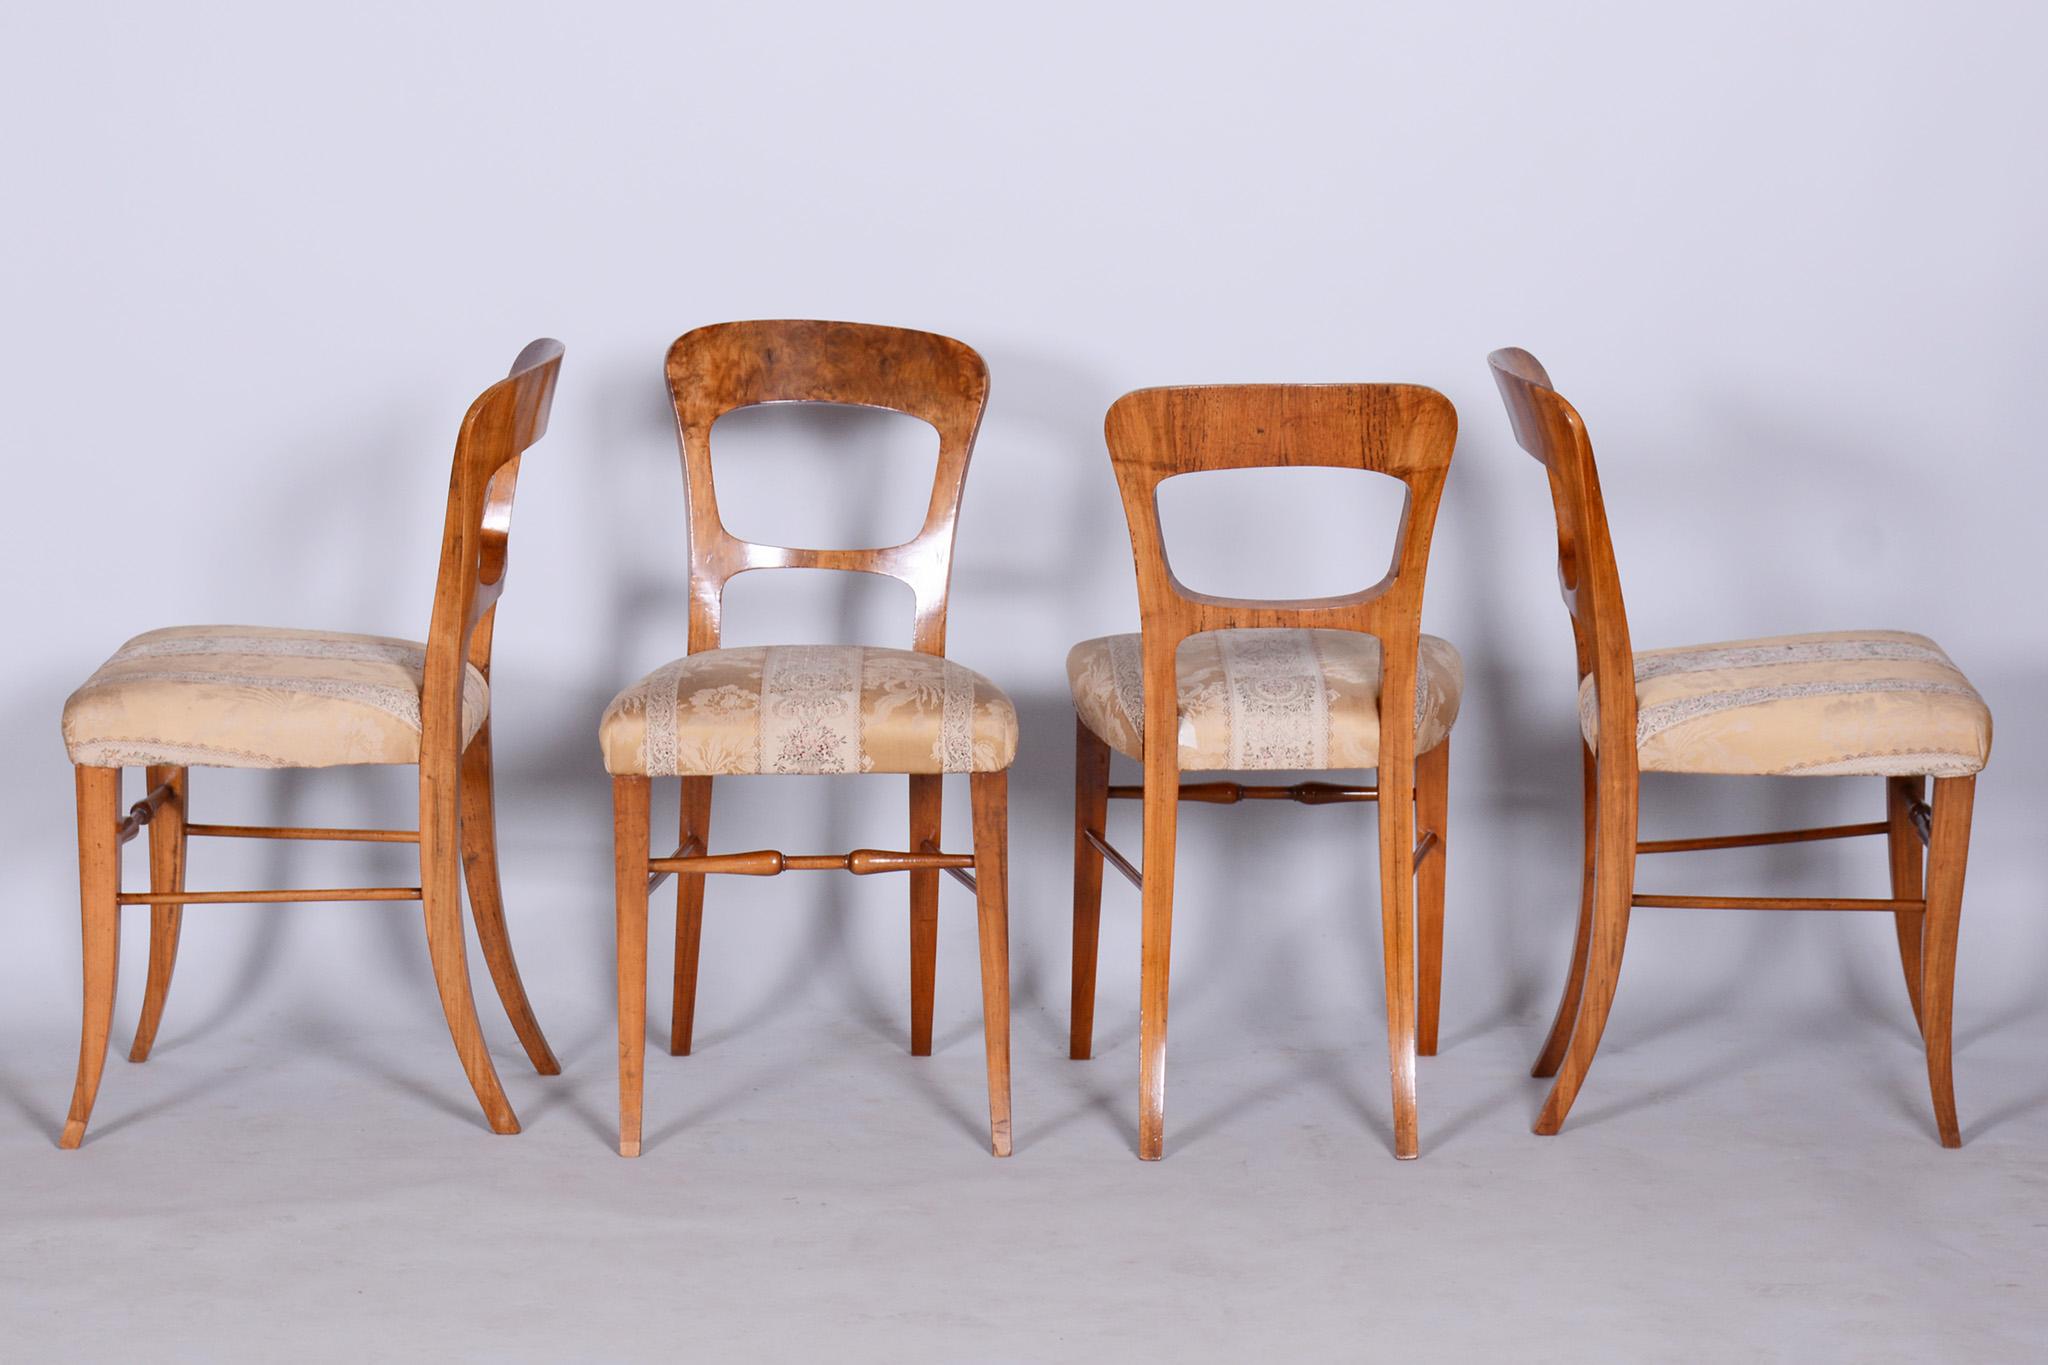 Set of Four Biedermeier Walnut Chairs, Original Condition, Czechia, 1830s In Good Condition For Sale In Horomerice, CZ